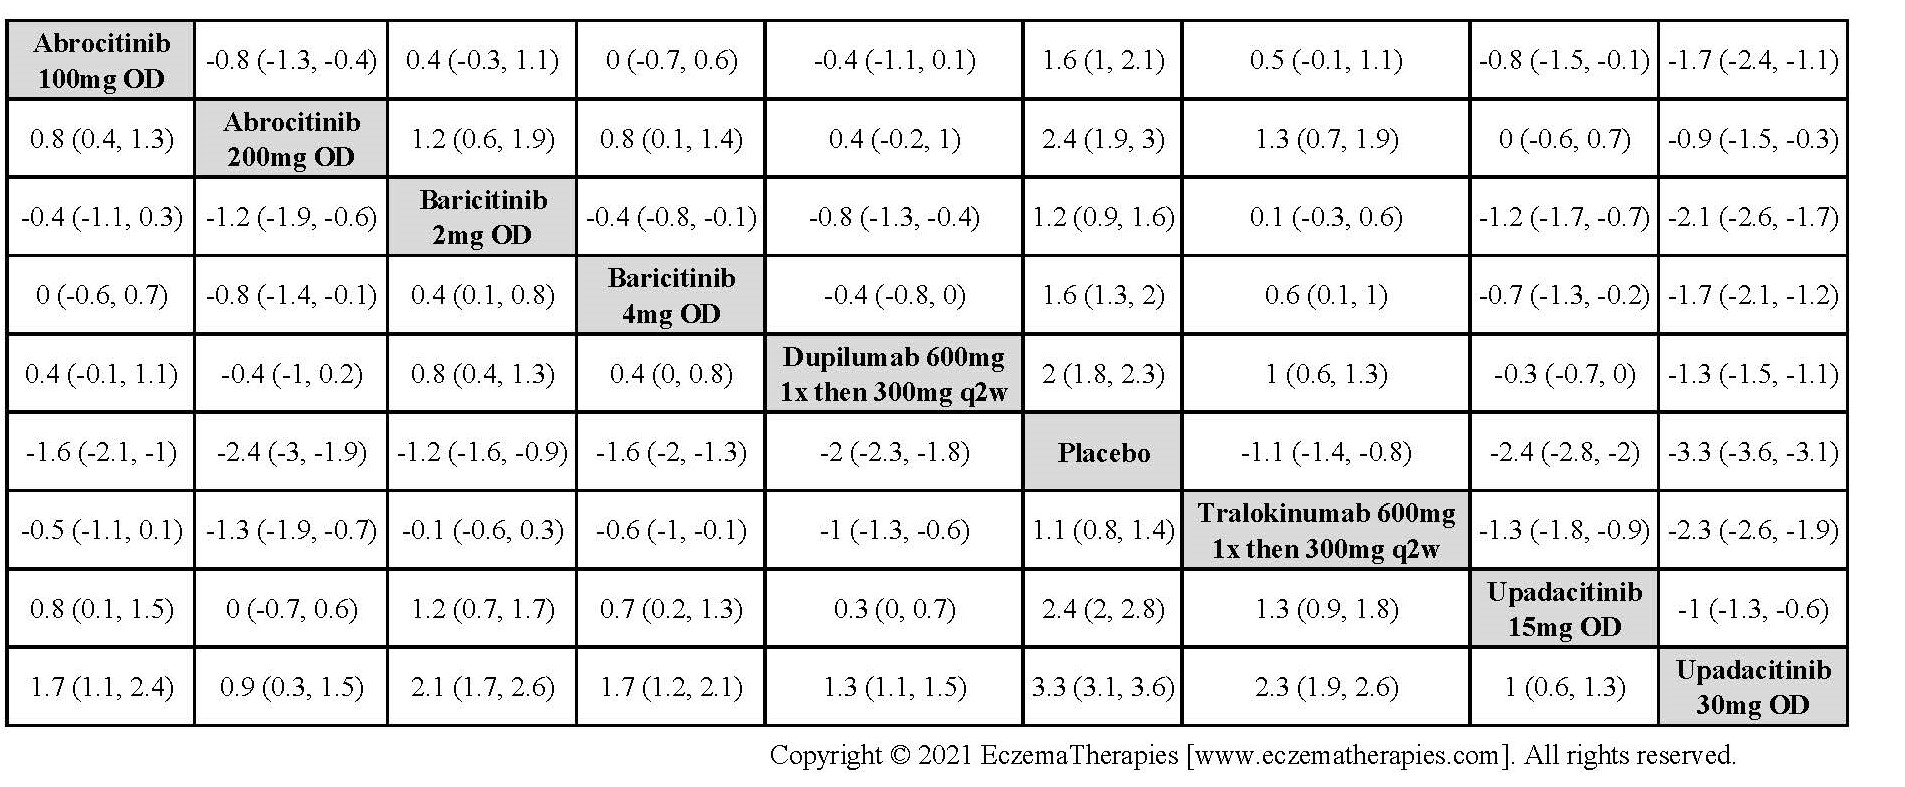 League table with relative effect estimates for change in Peak Pruritus NRS up to 16 weeks of treatment for selected medications and placebo in adults.